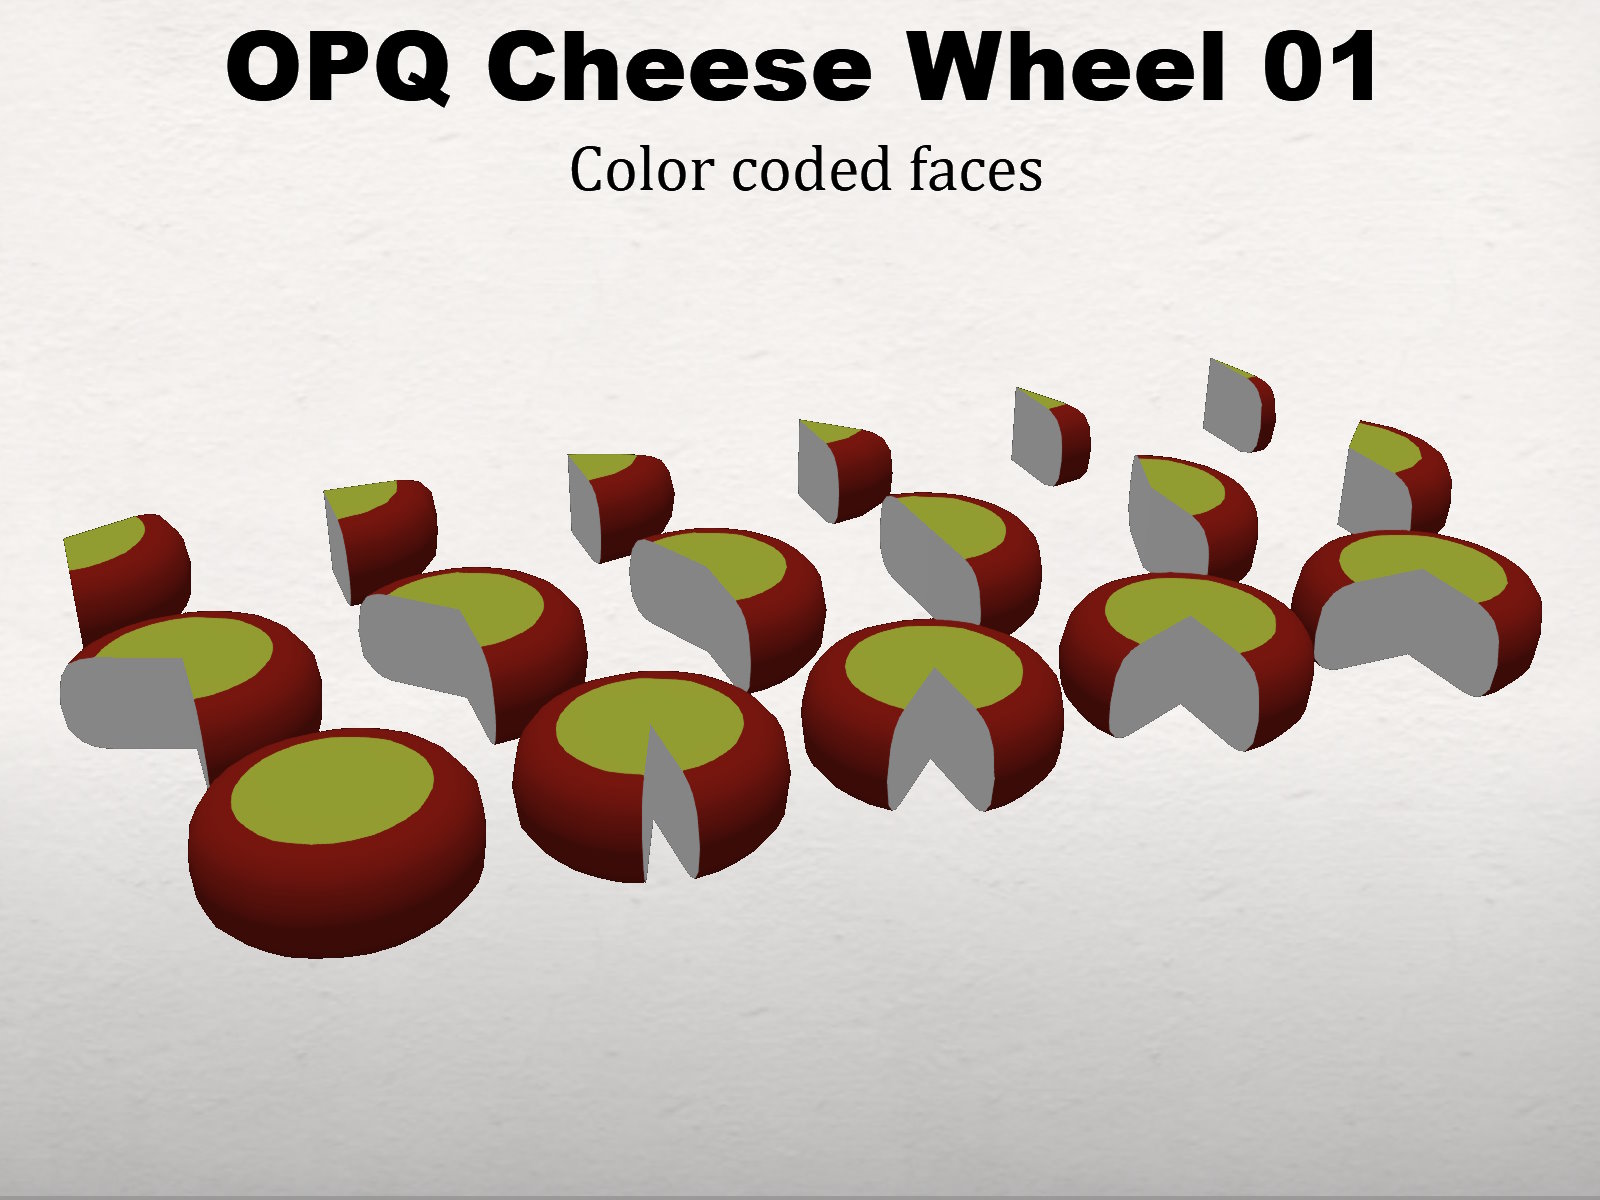 OPQ Cheese Wheel 01 set color coded faces.jpg